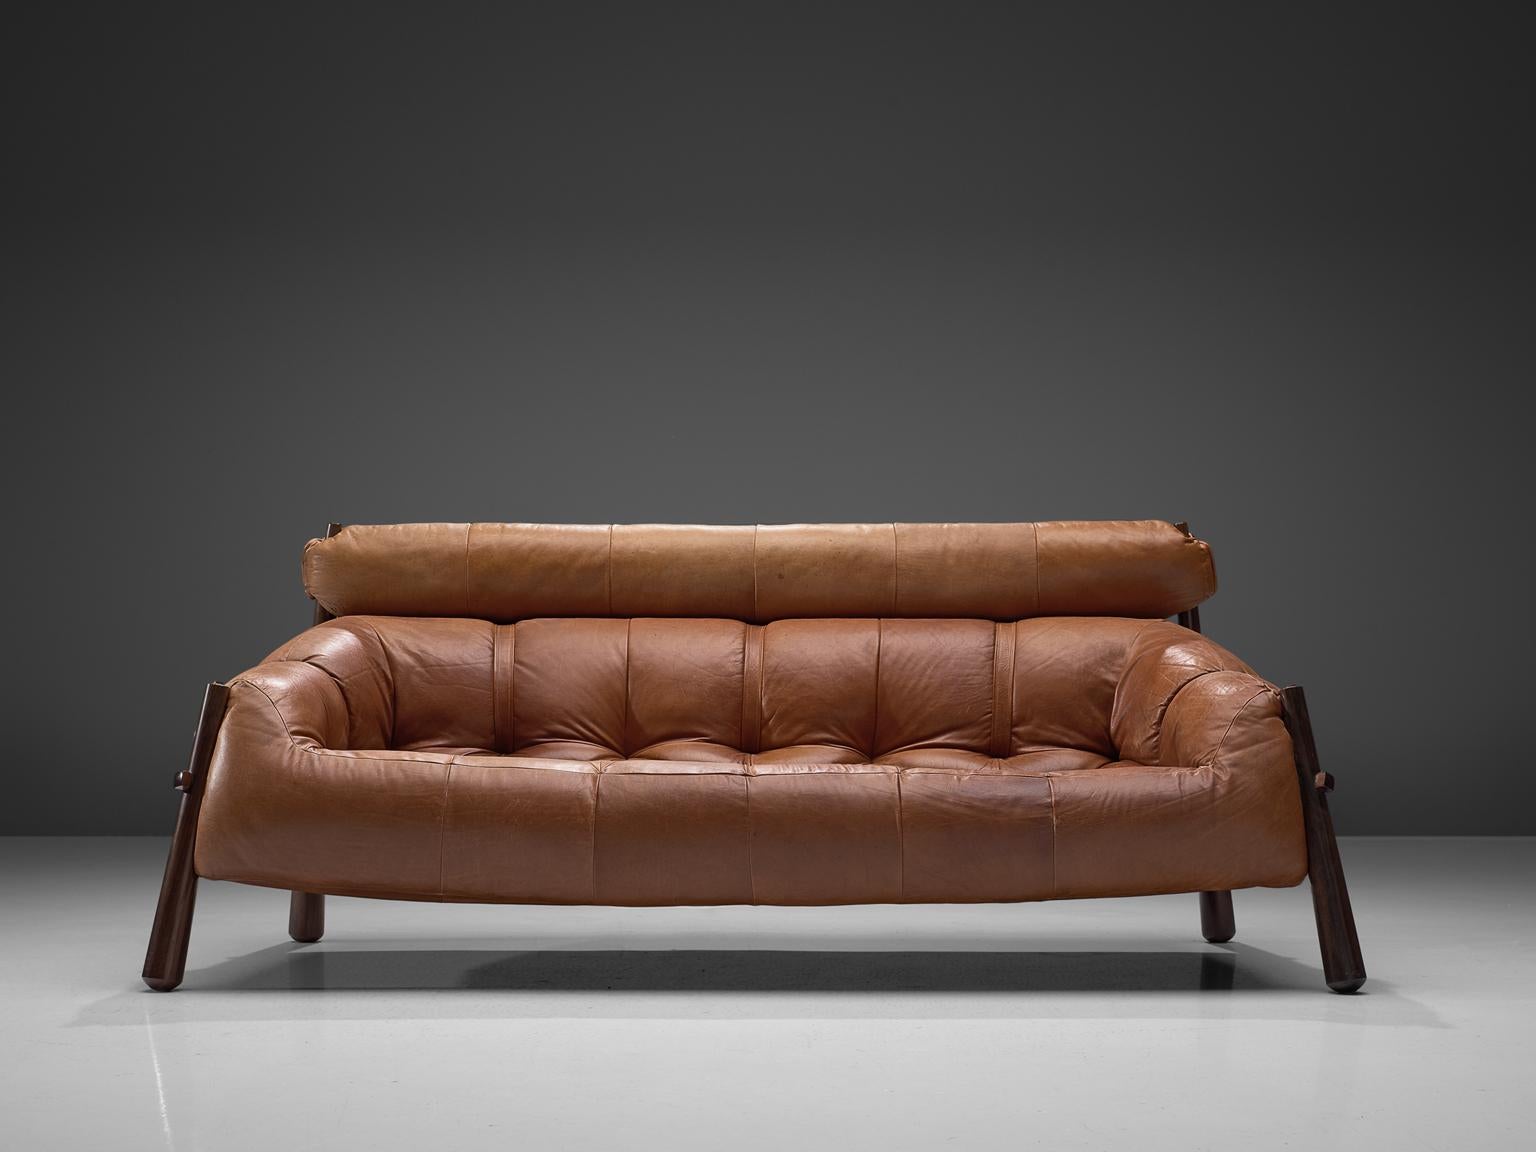 Leather Percival Lafer 'Mp-81' Lounge Set in Rosewood and Cognac